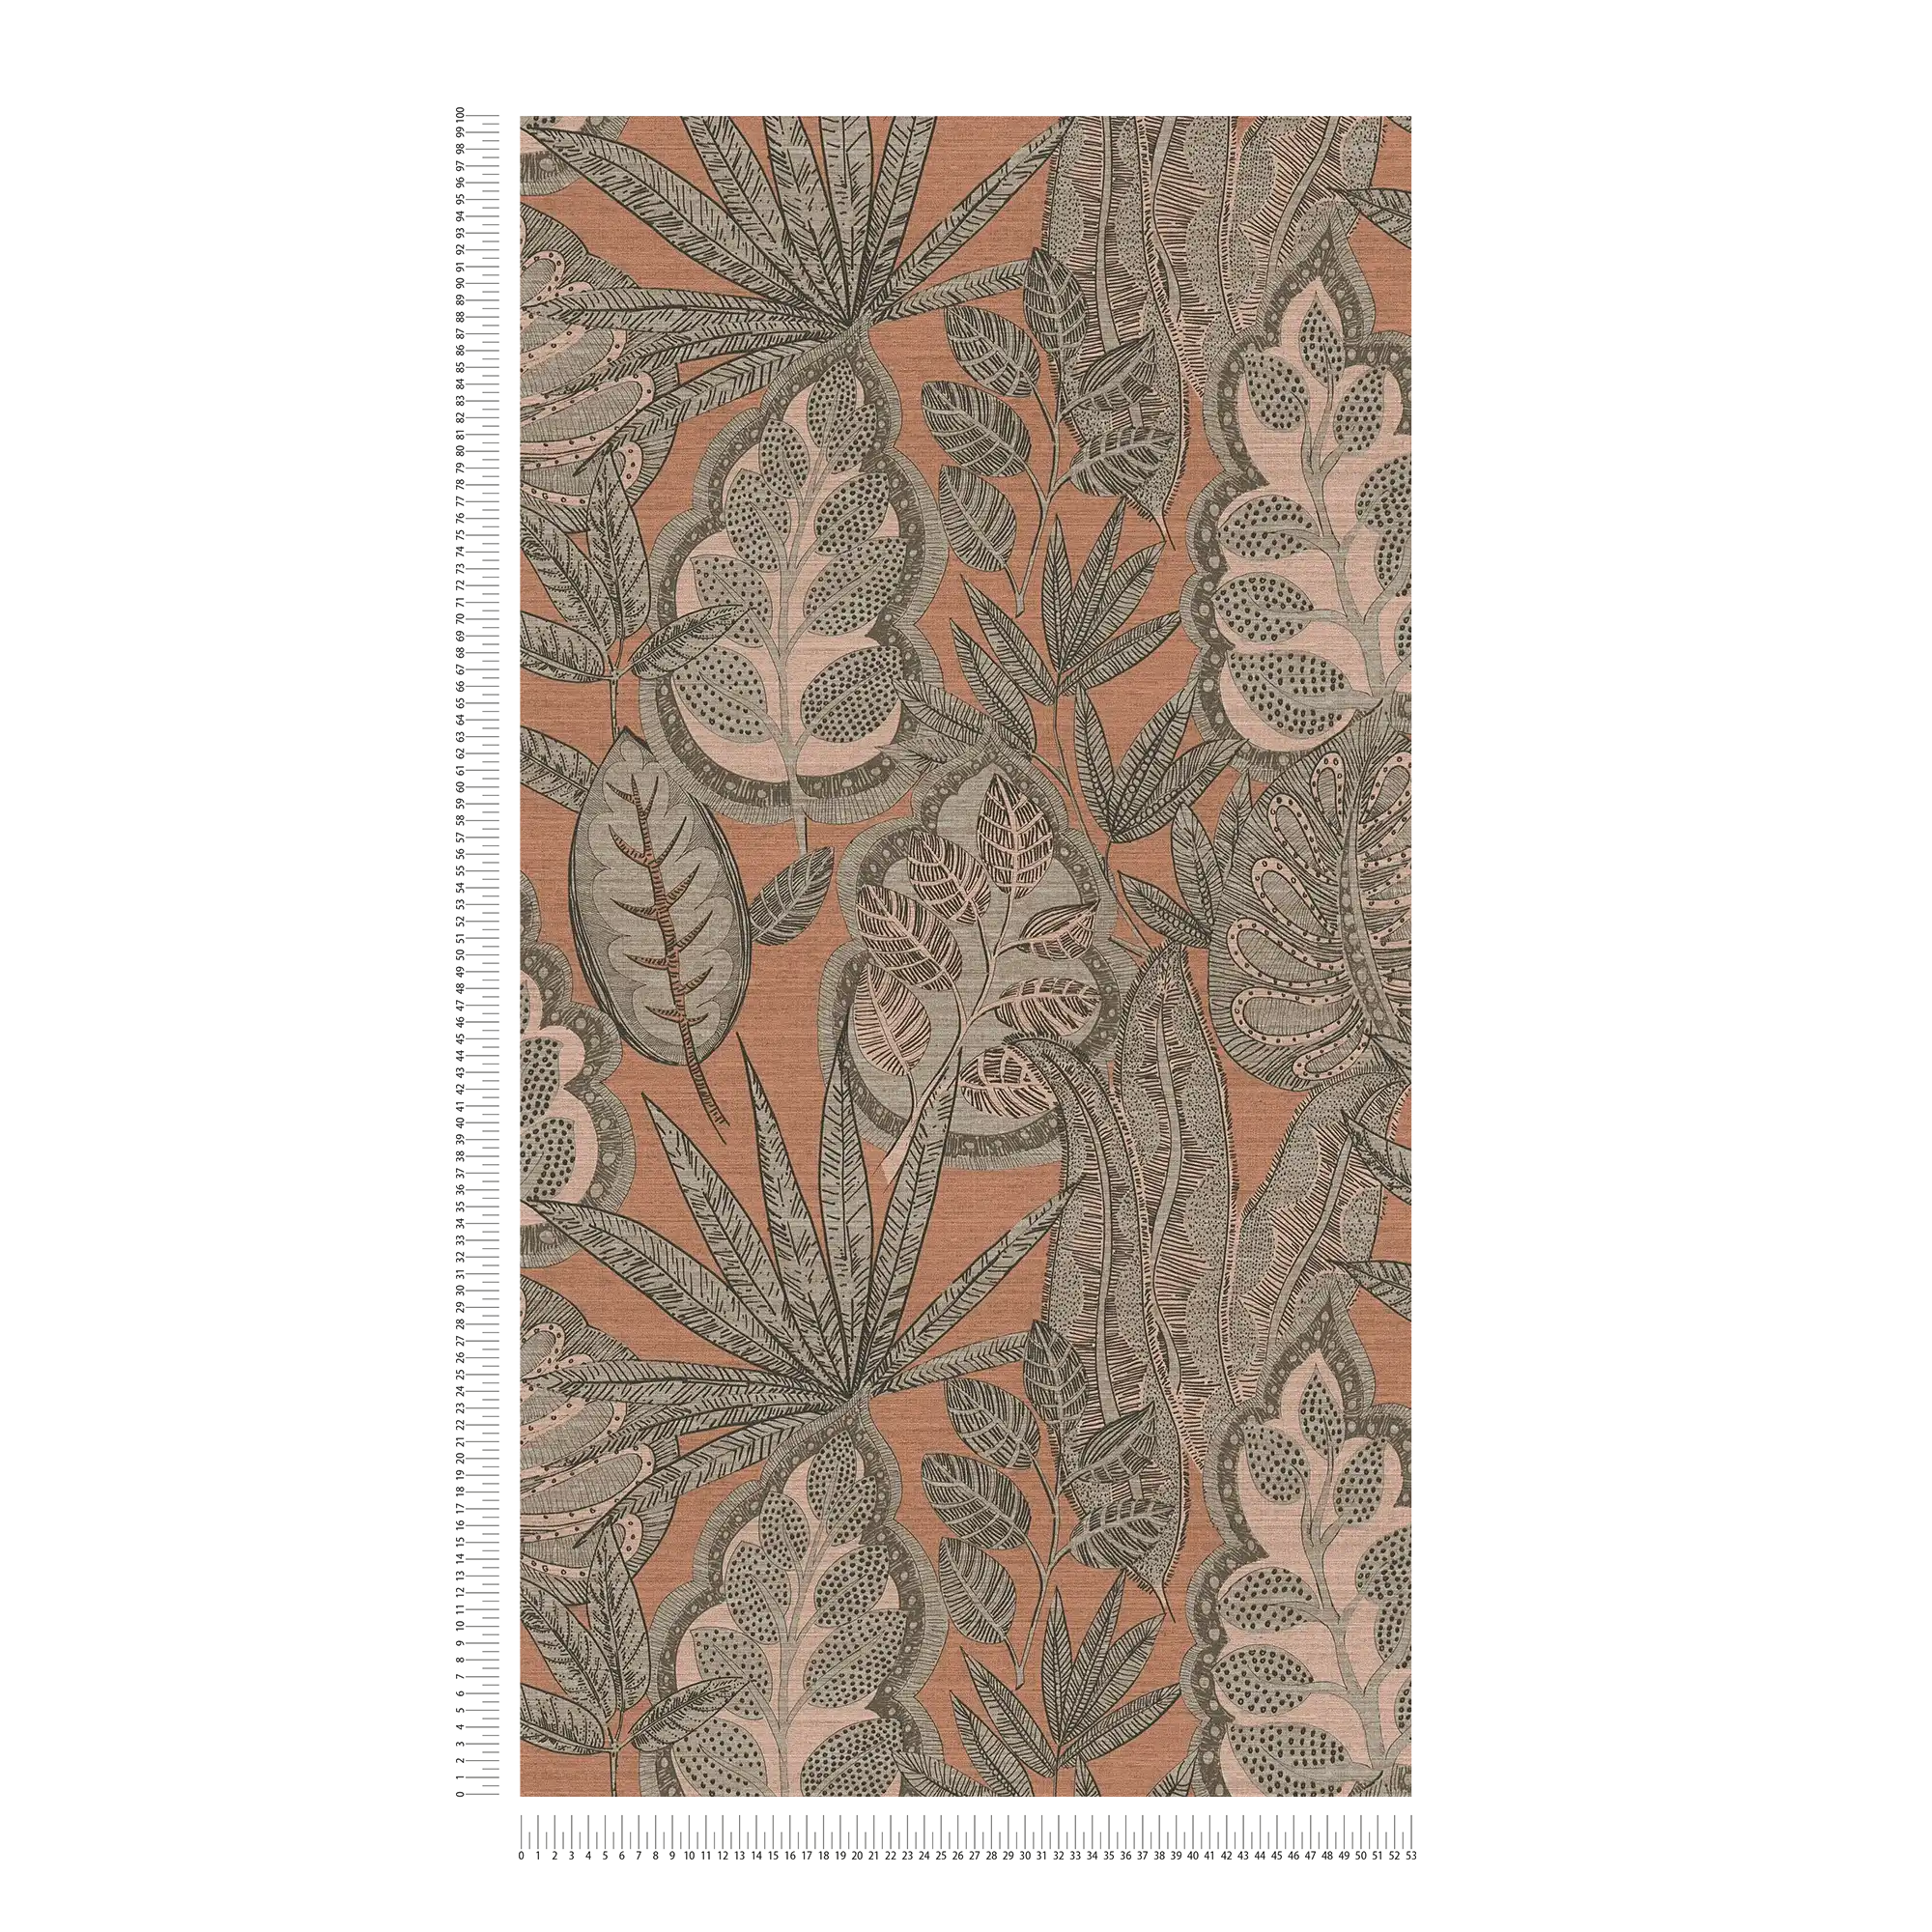             Non-woven wallpaper floral in graphic design with light structure, matt - pink, grey, taupe
        